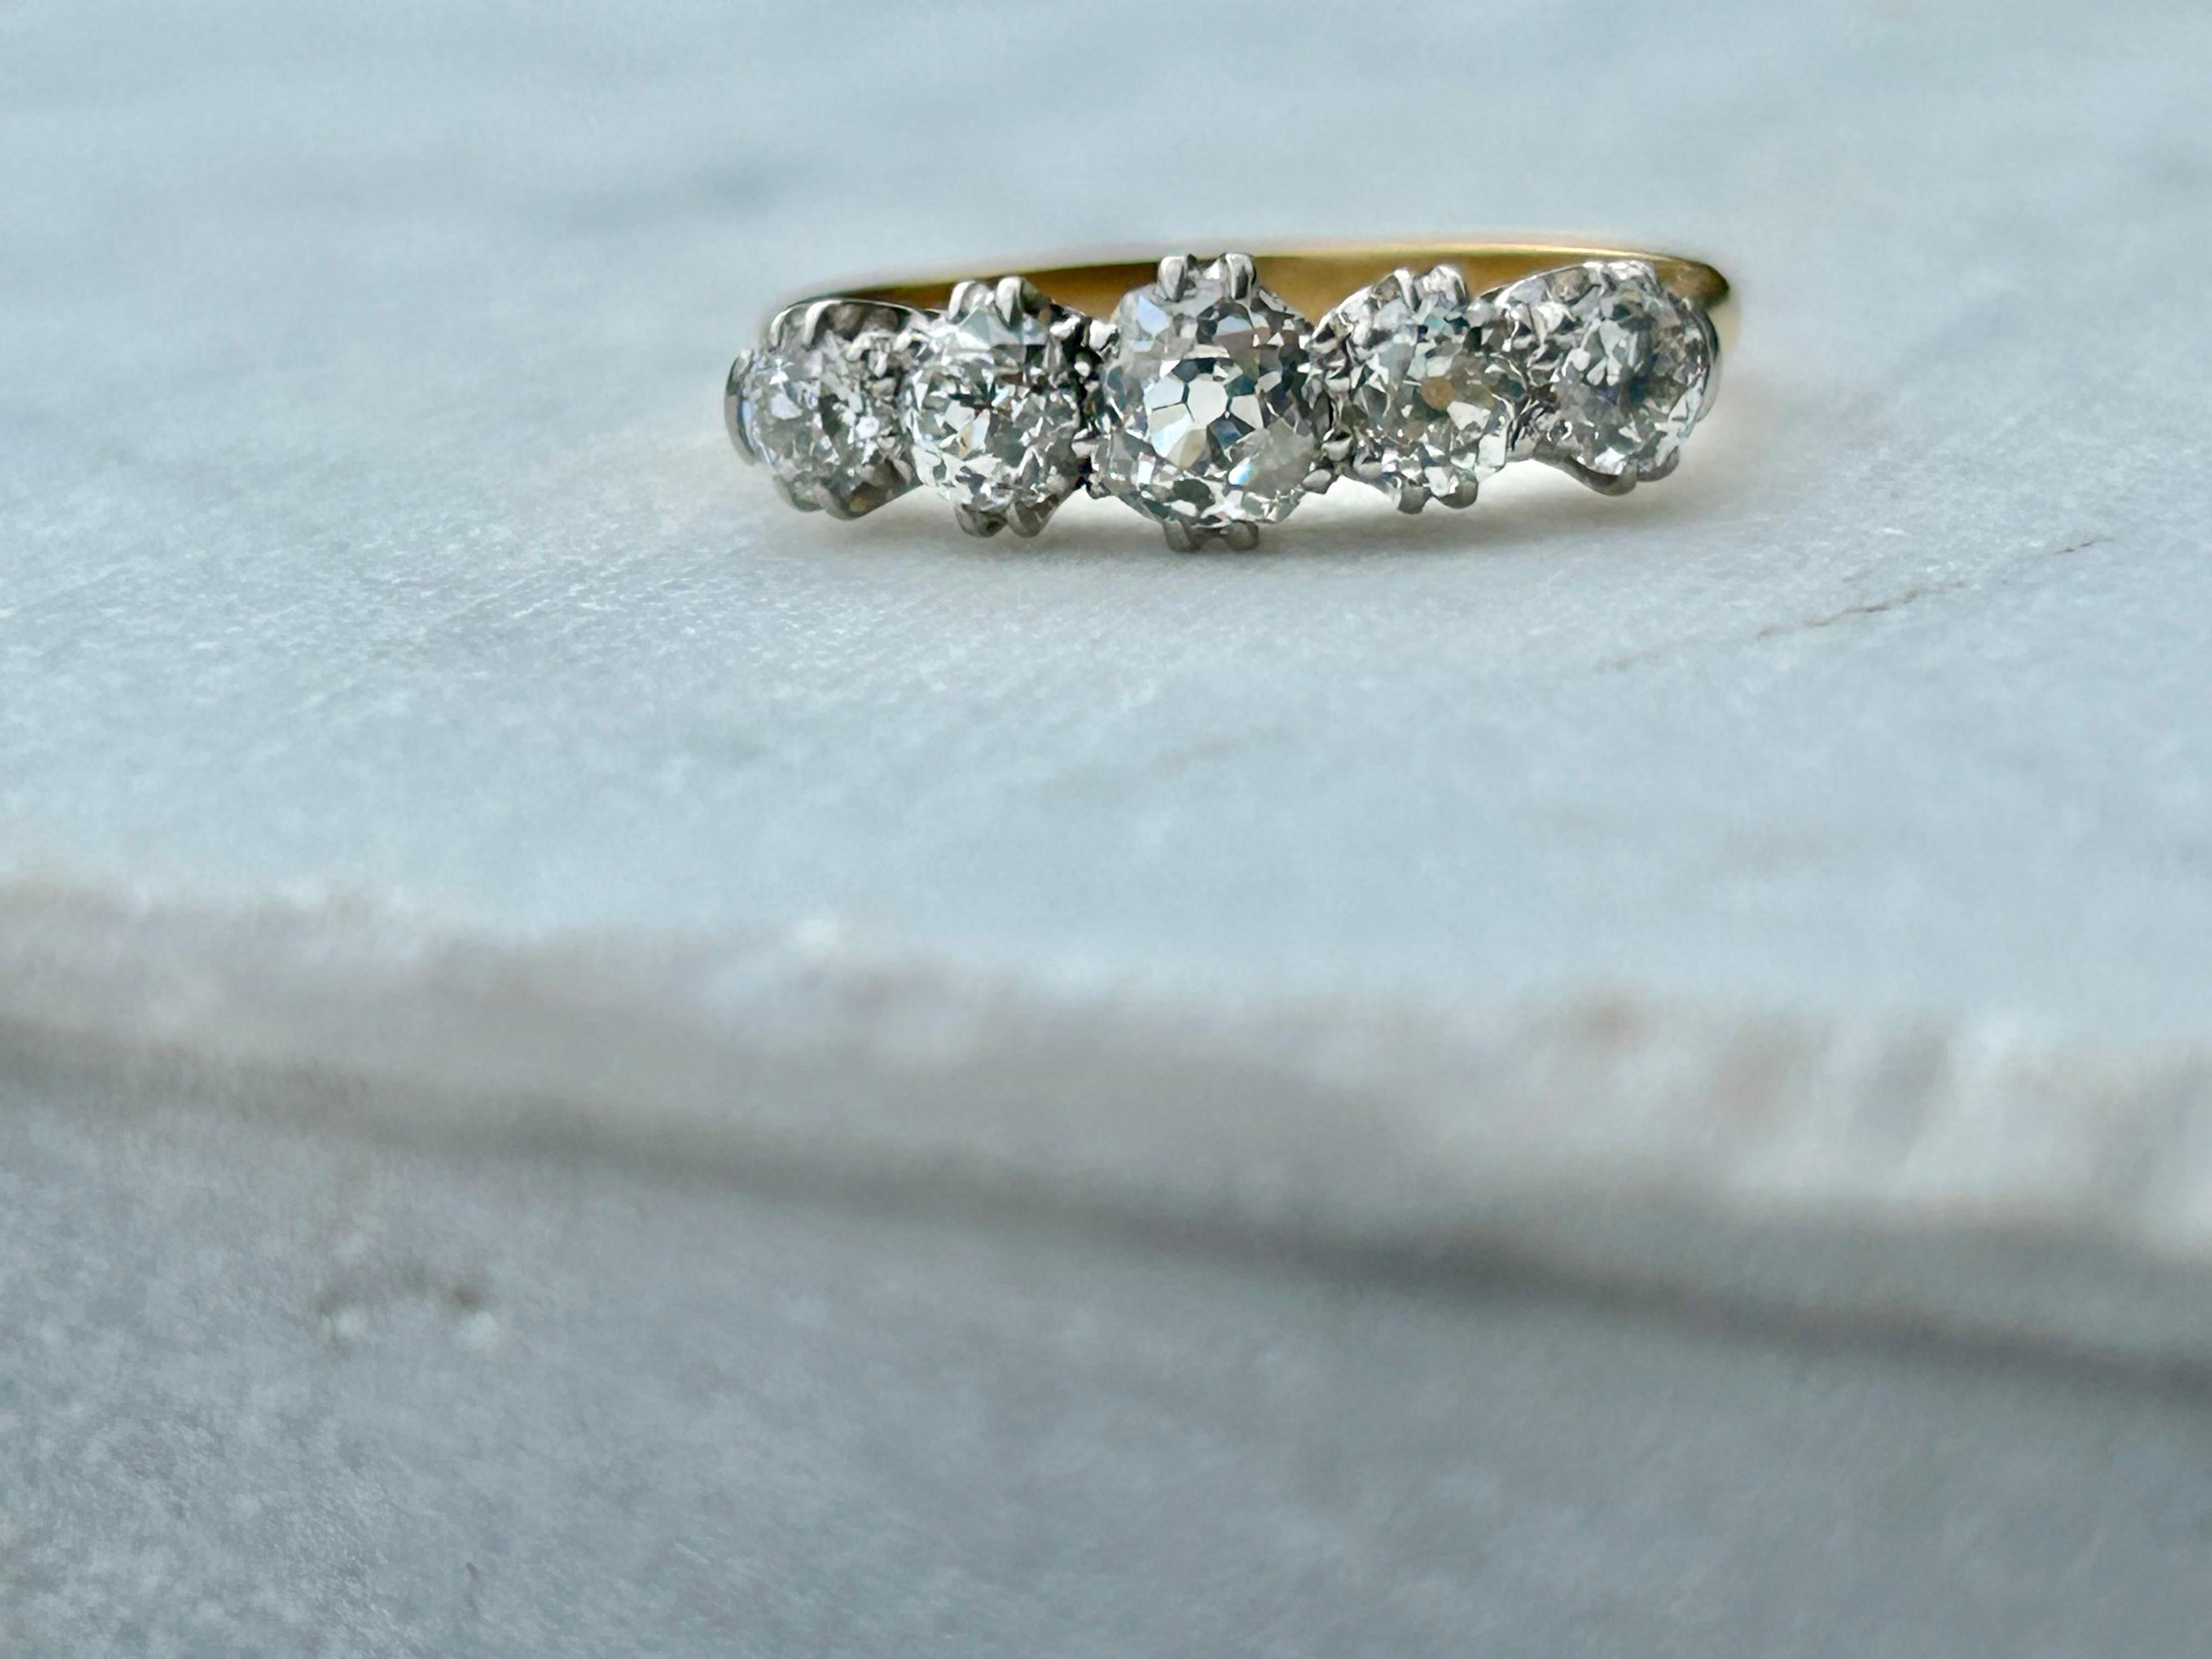 Antique Edwardian 1.65 carat Five Stone Old Mine Cut Diamond Ring In Excellent Condition For Sale In Joelton, TN